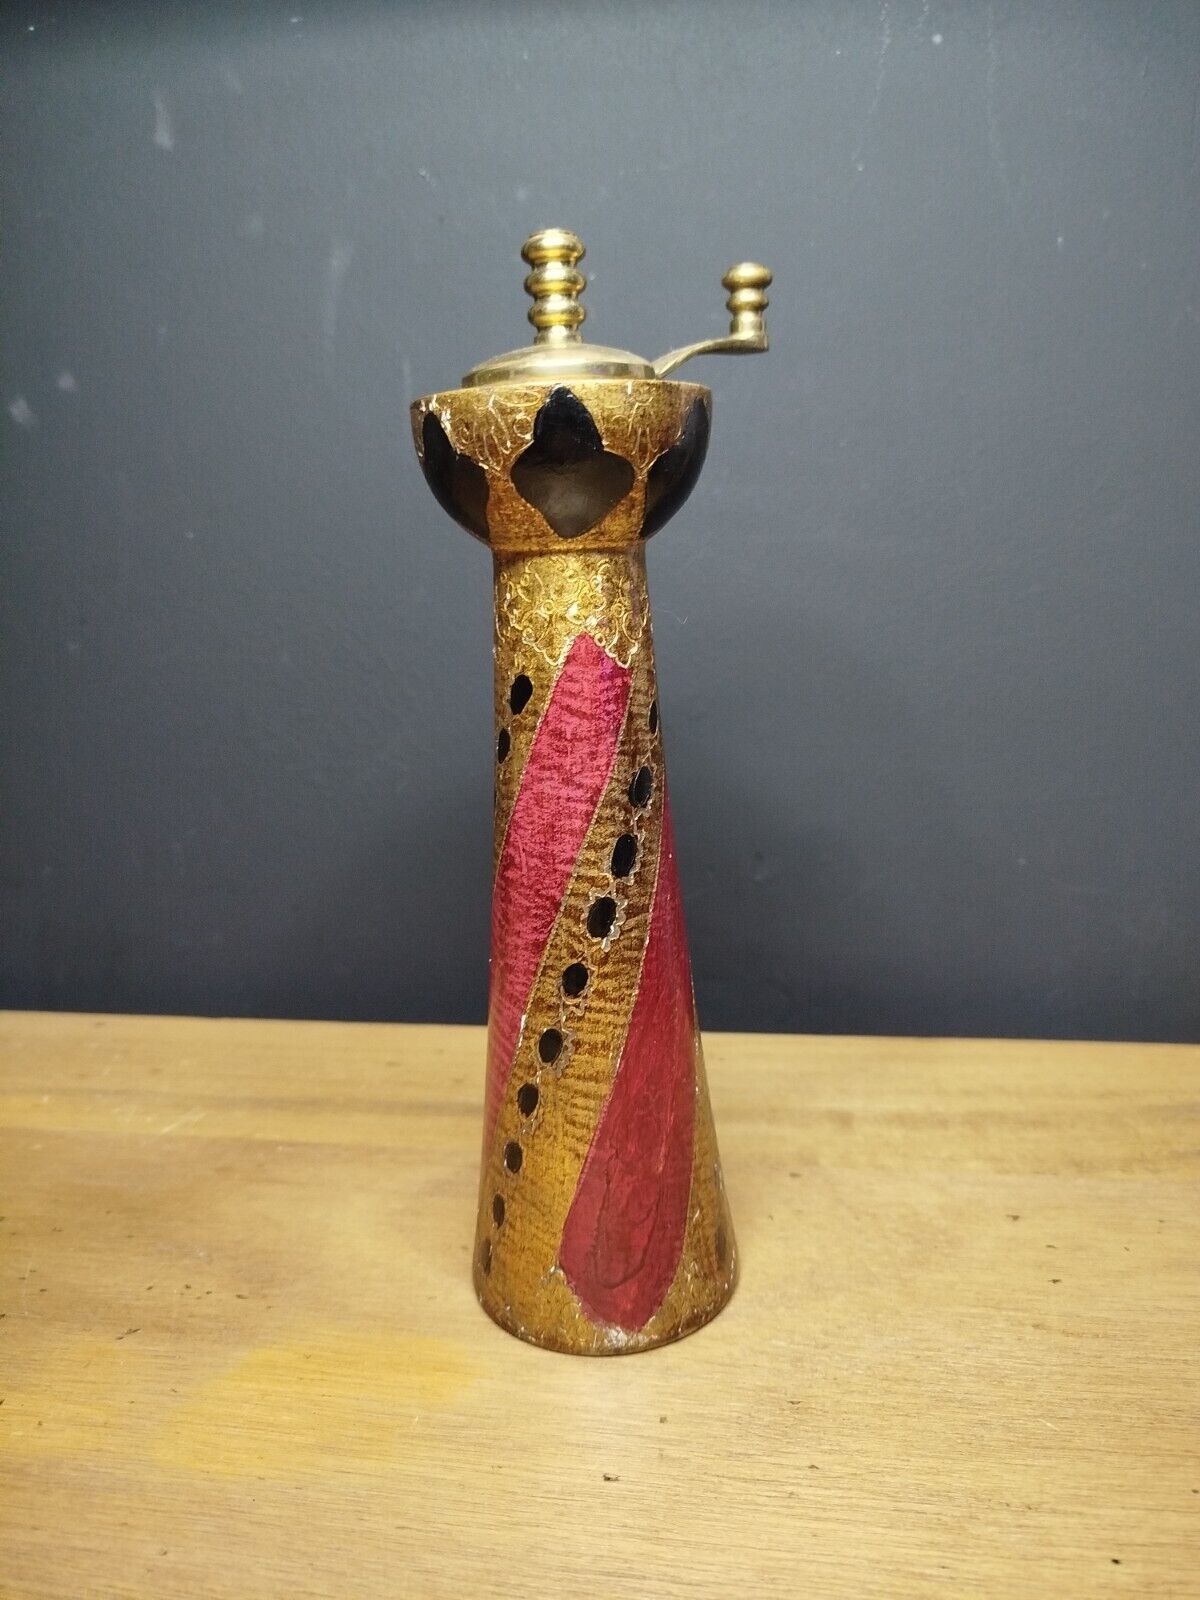 Vintage Decoration - Large Pepper Mill - Florence - Italy - Golden Wood - 20th Century